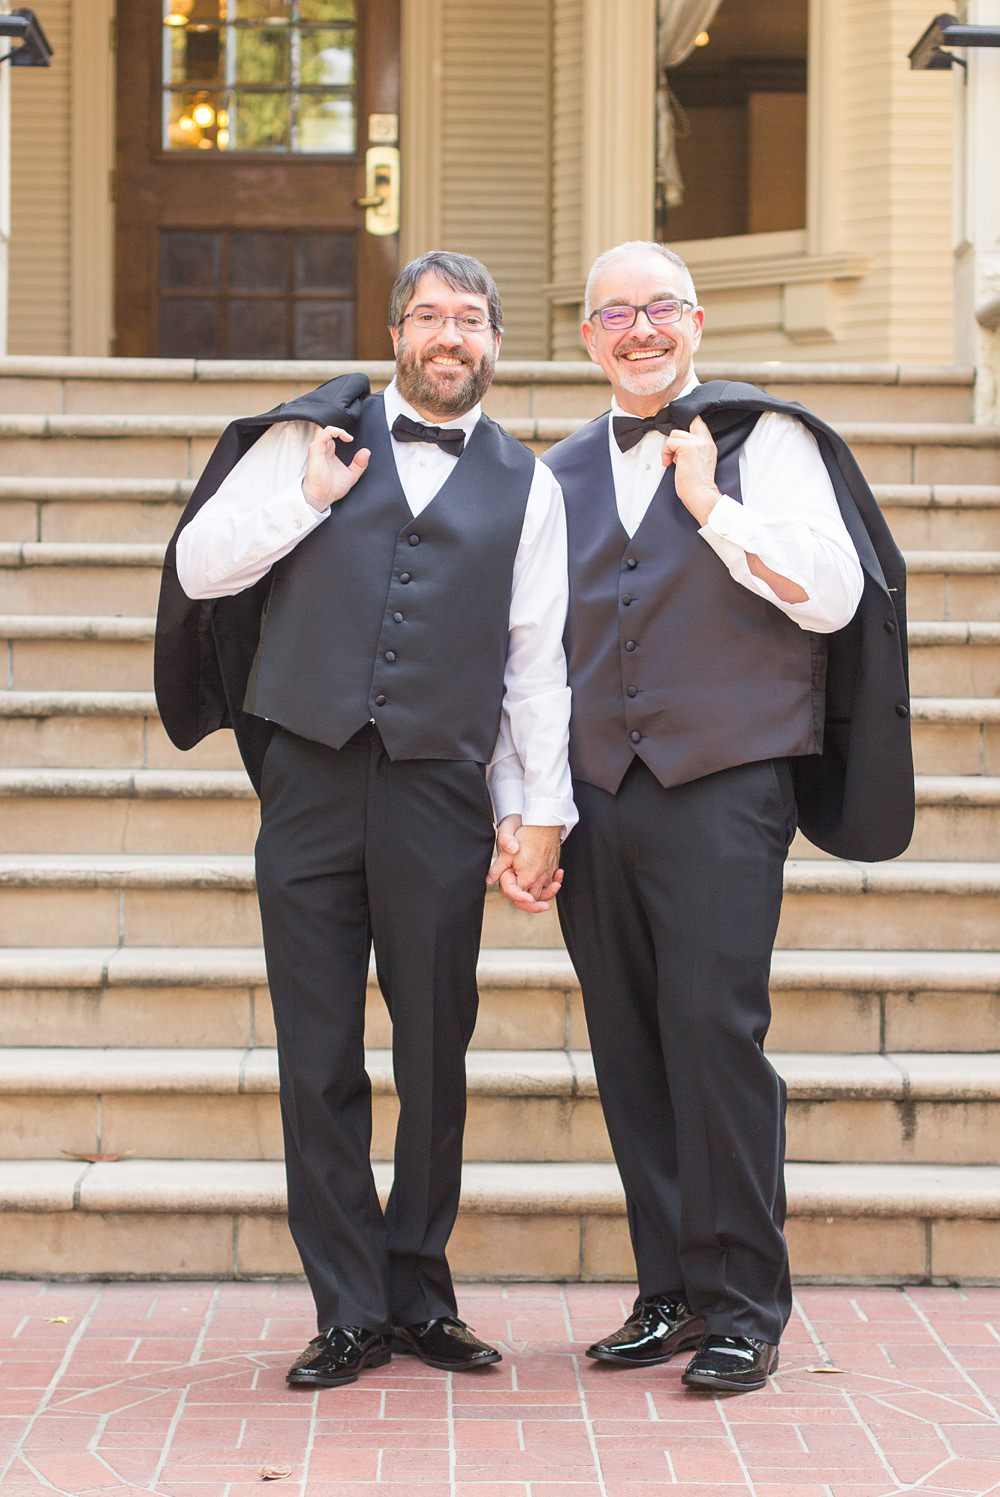 LGBT Downtown Sacramento Sterling Hotel Wedding by Adrienne and Dani Photography